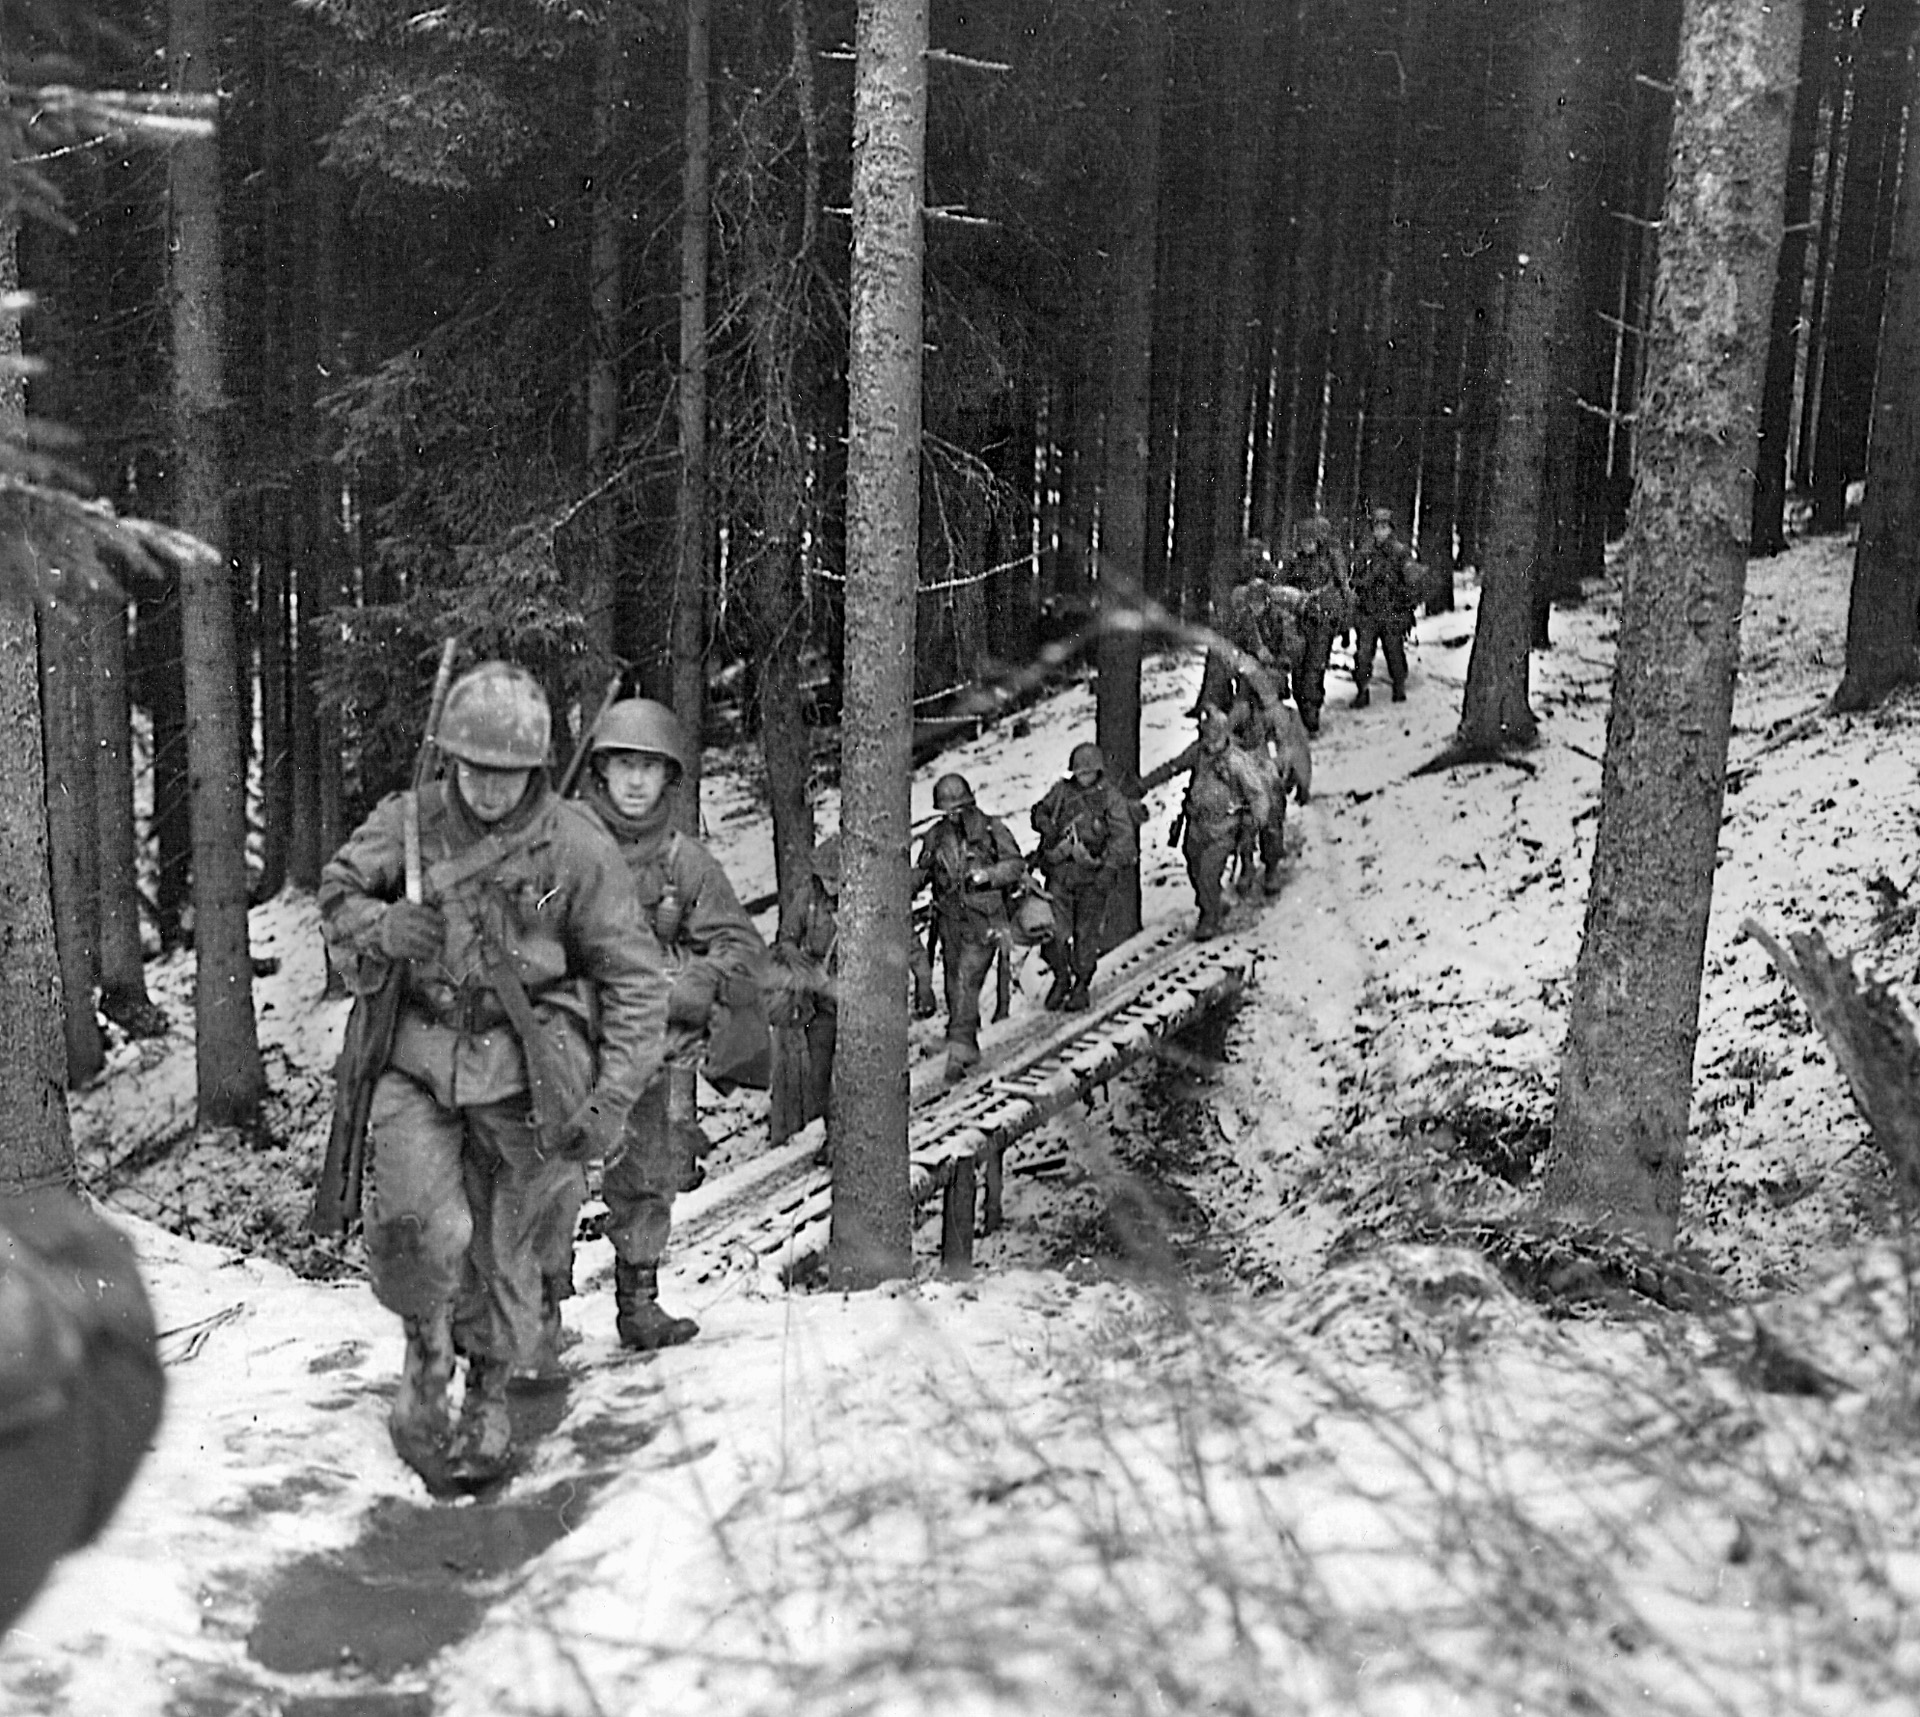 Soldiers of the 106th Infantry Division trudge through the snow in Belgium during the winter of 1944. The inexperienced 106th suffered at the hands of the marauding Germans during the opening hours of the Battle of the Bulge, sustaining 8,627 casualties. The number was the highest for a U.S. combat division in the shortest period of time during the entire war. 